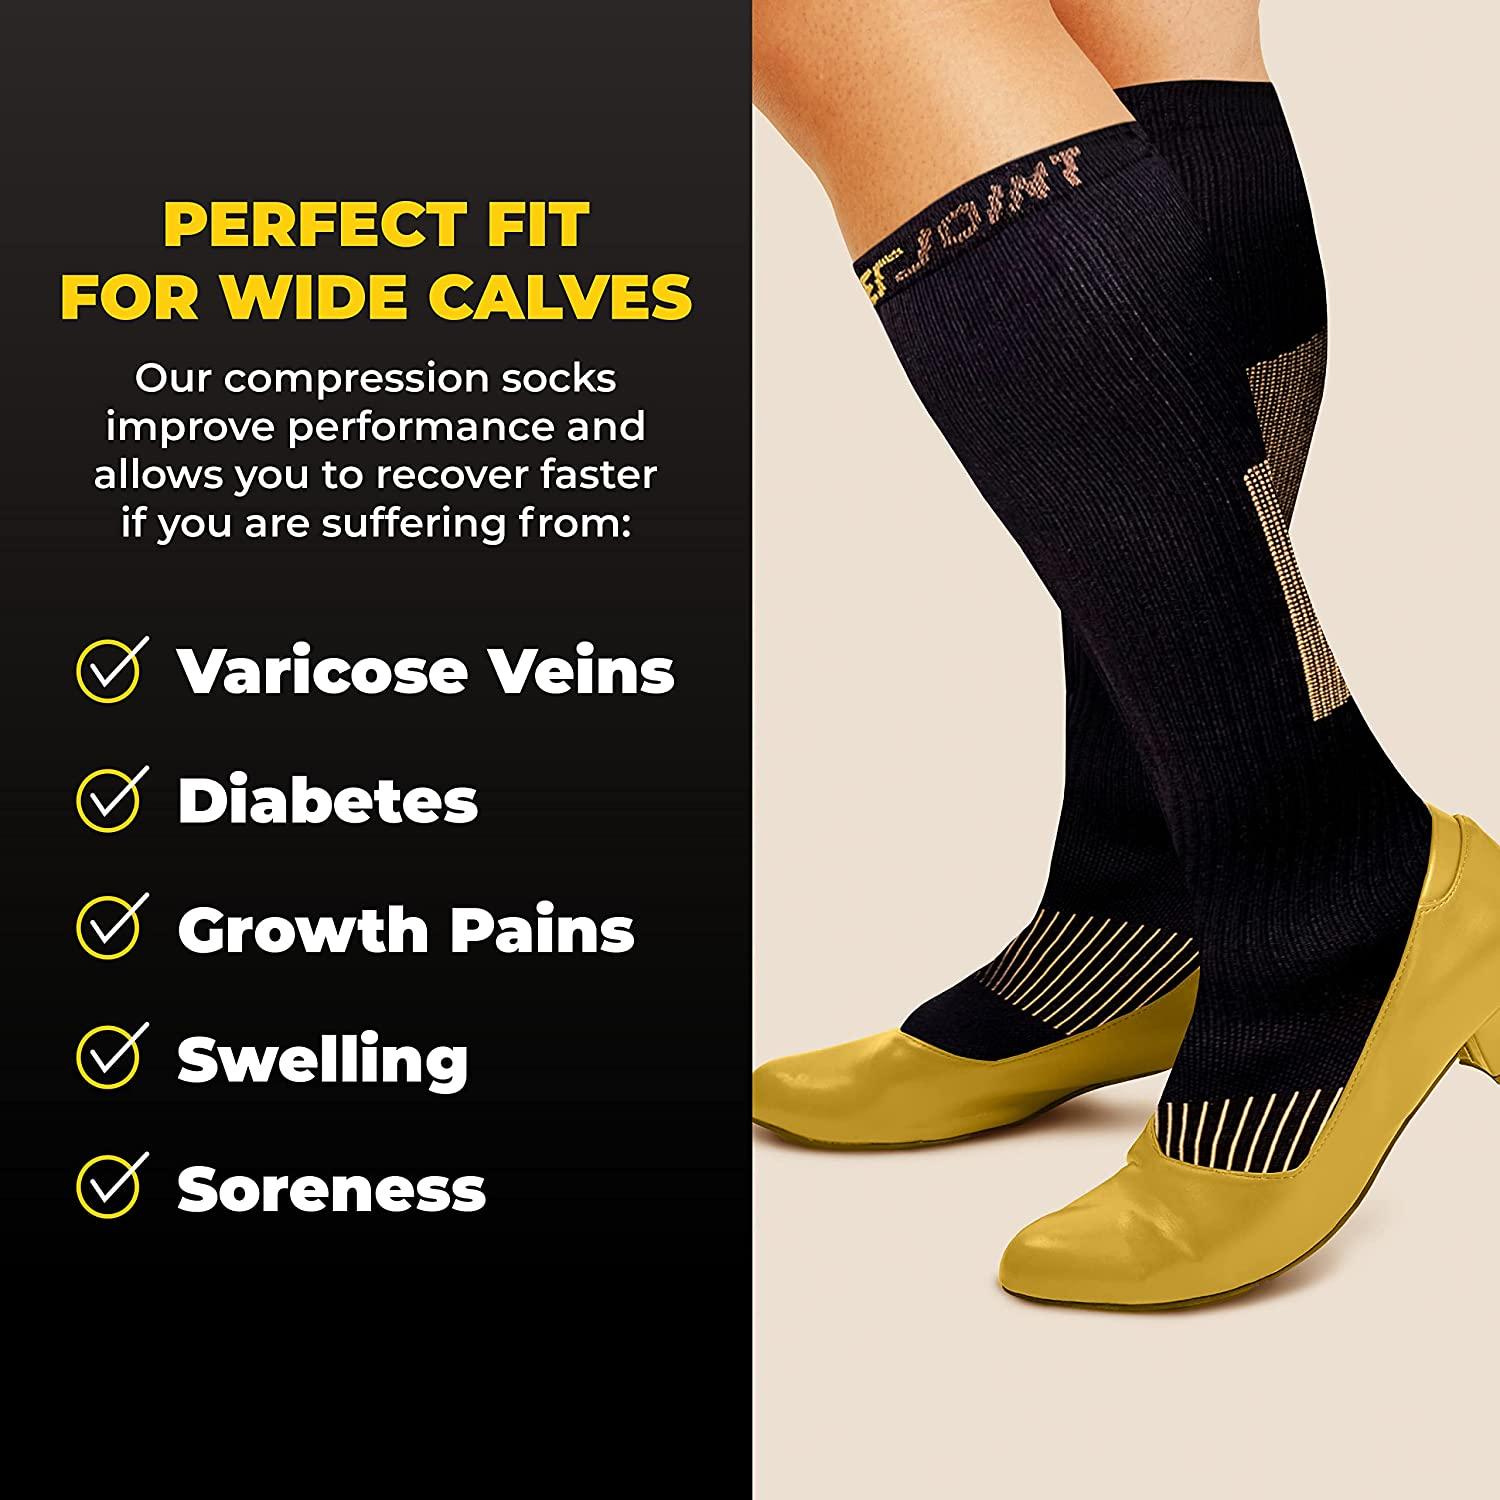  Wide Calf Copper Compression Socks For Women & Men -  Diabetic Sock, Improves Circulation, Reduces Swelling & Pain - For Nurses,  Running, & Everyday Use - Copper Infused Nylon By CopperJoint